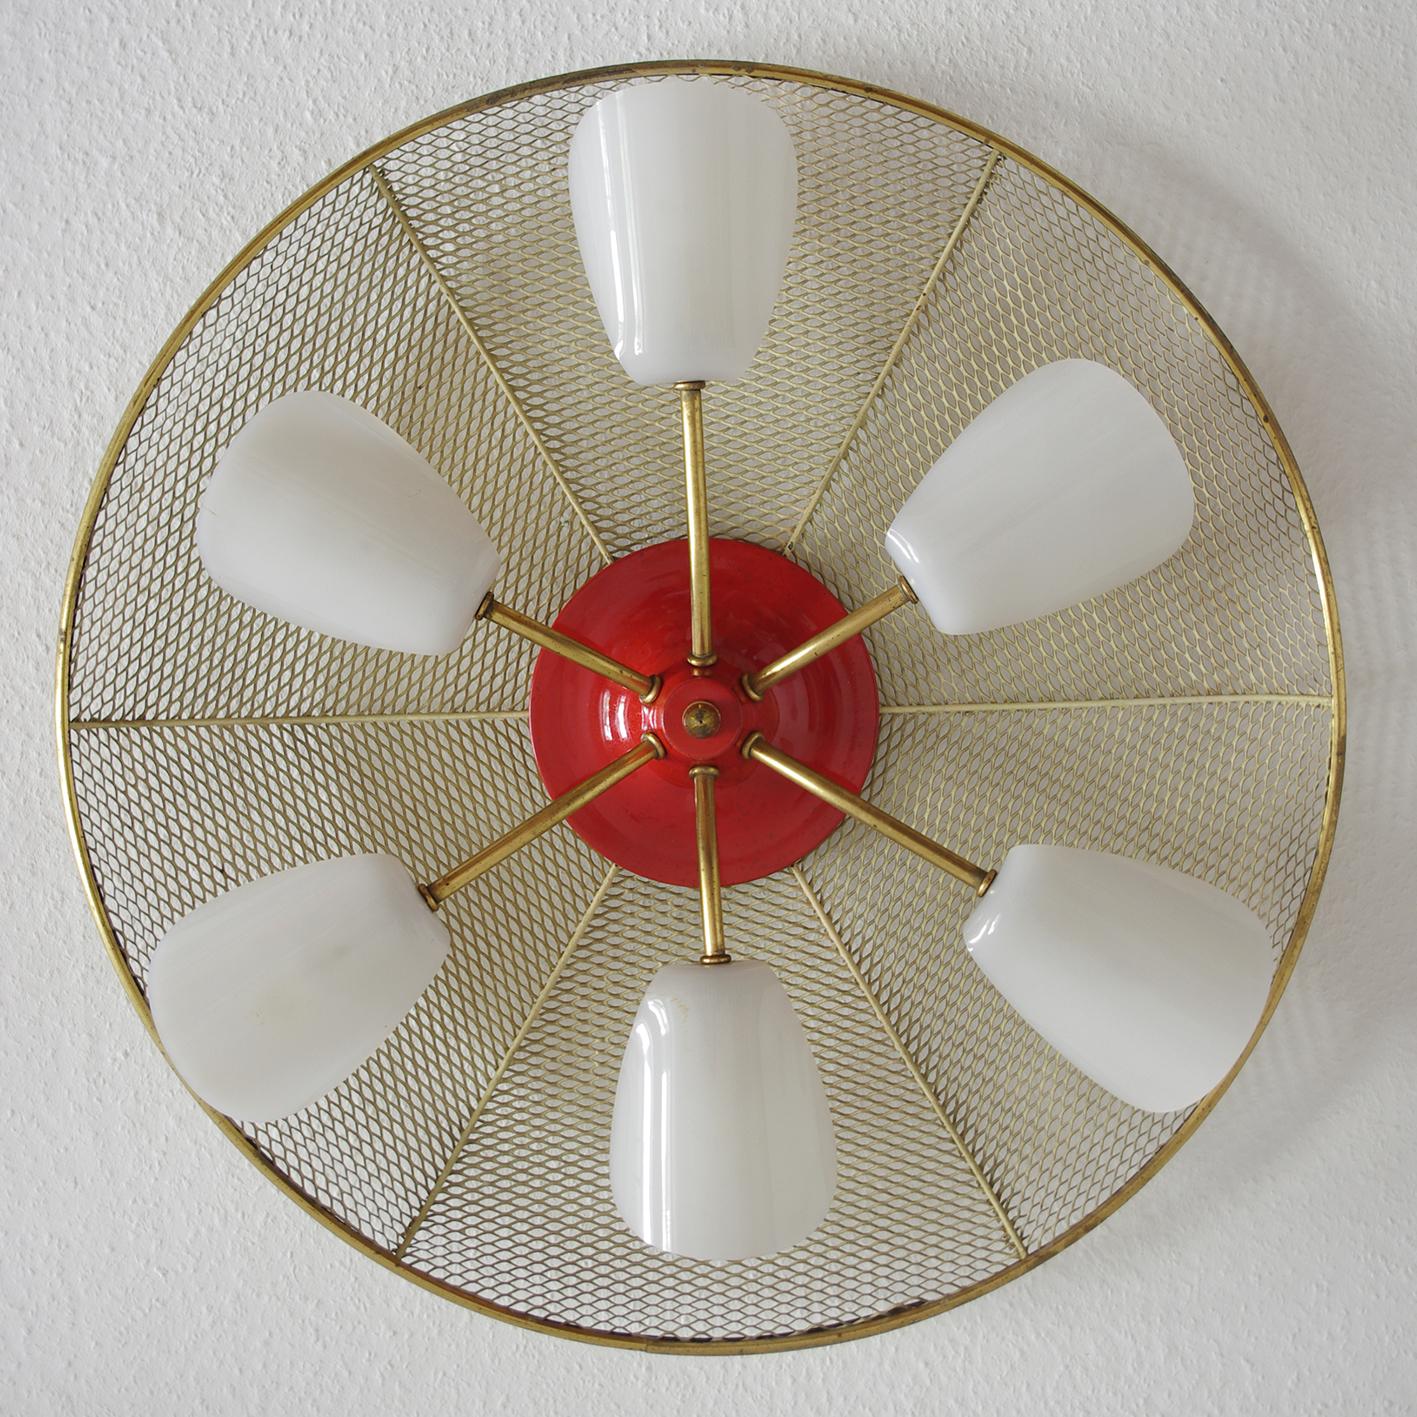 Wonderful mid-century flush mount attributed to Mathieu Matégot.
France, 1950s.
Perforated, enameled metal shield with brass and Lucite.
Lamp sockets: 6.